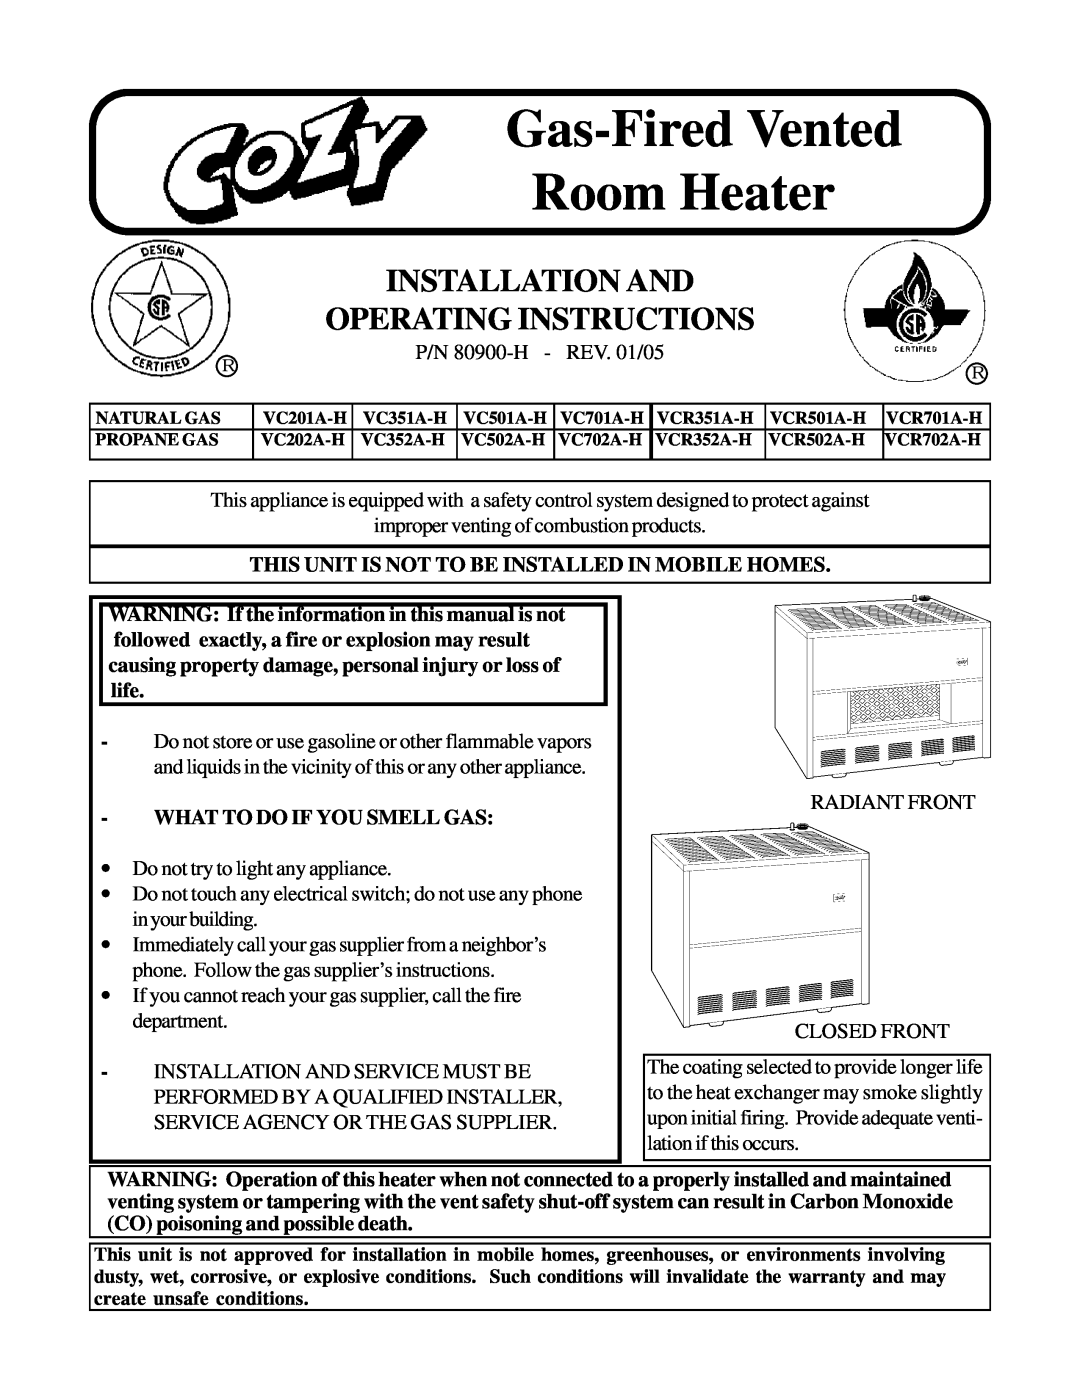 Louisville Tin and Stove VCR701A-H warranty P/N 80900-H, REV. 01/05, This Unit Is Not To Be Installed In Mobile Homes 